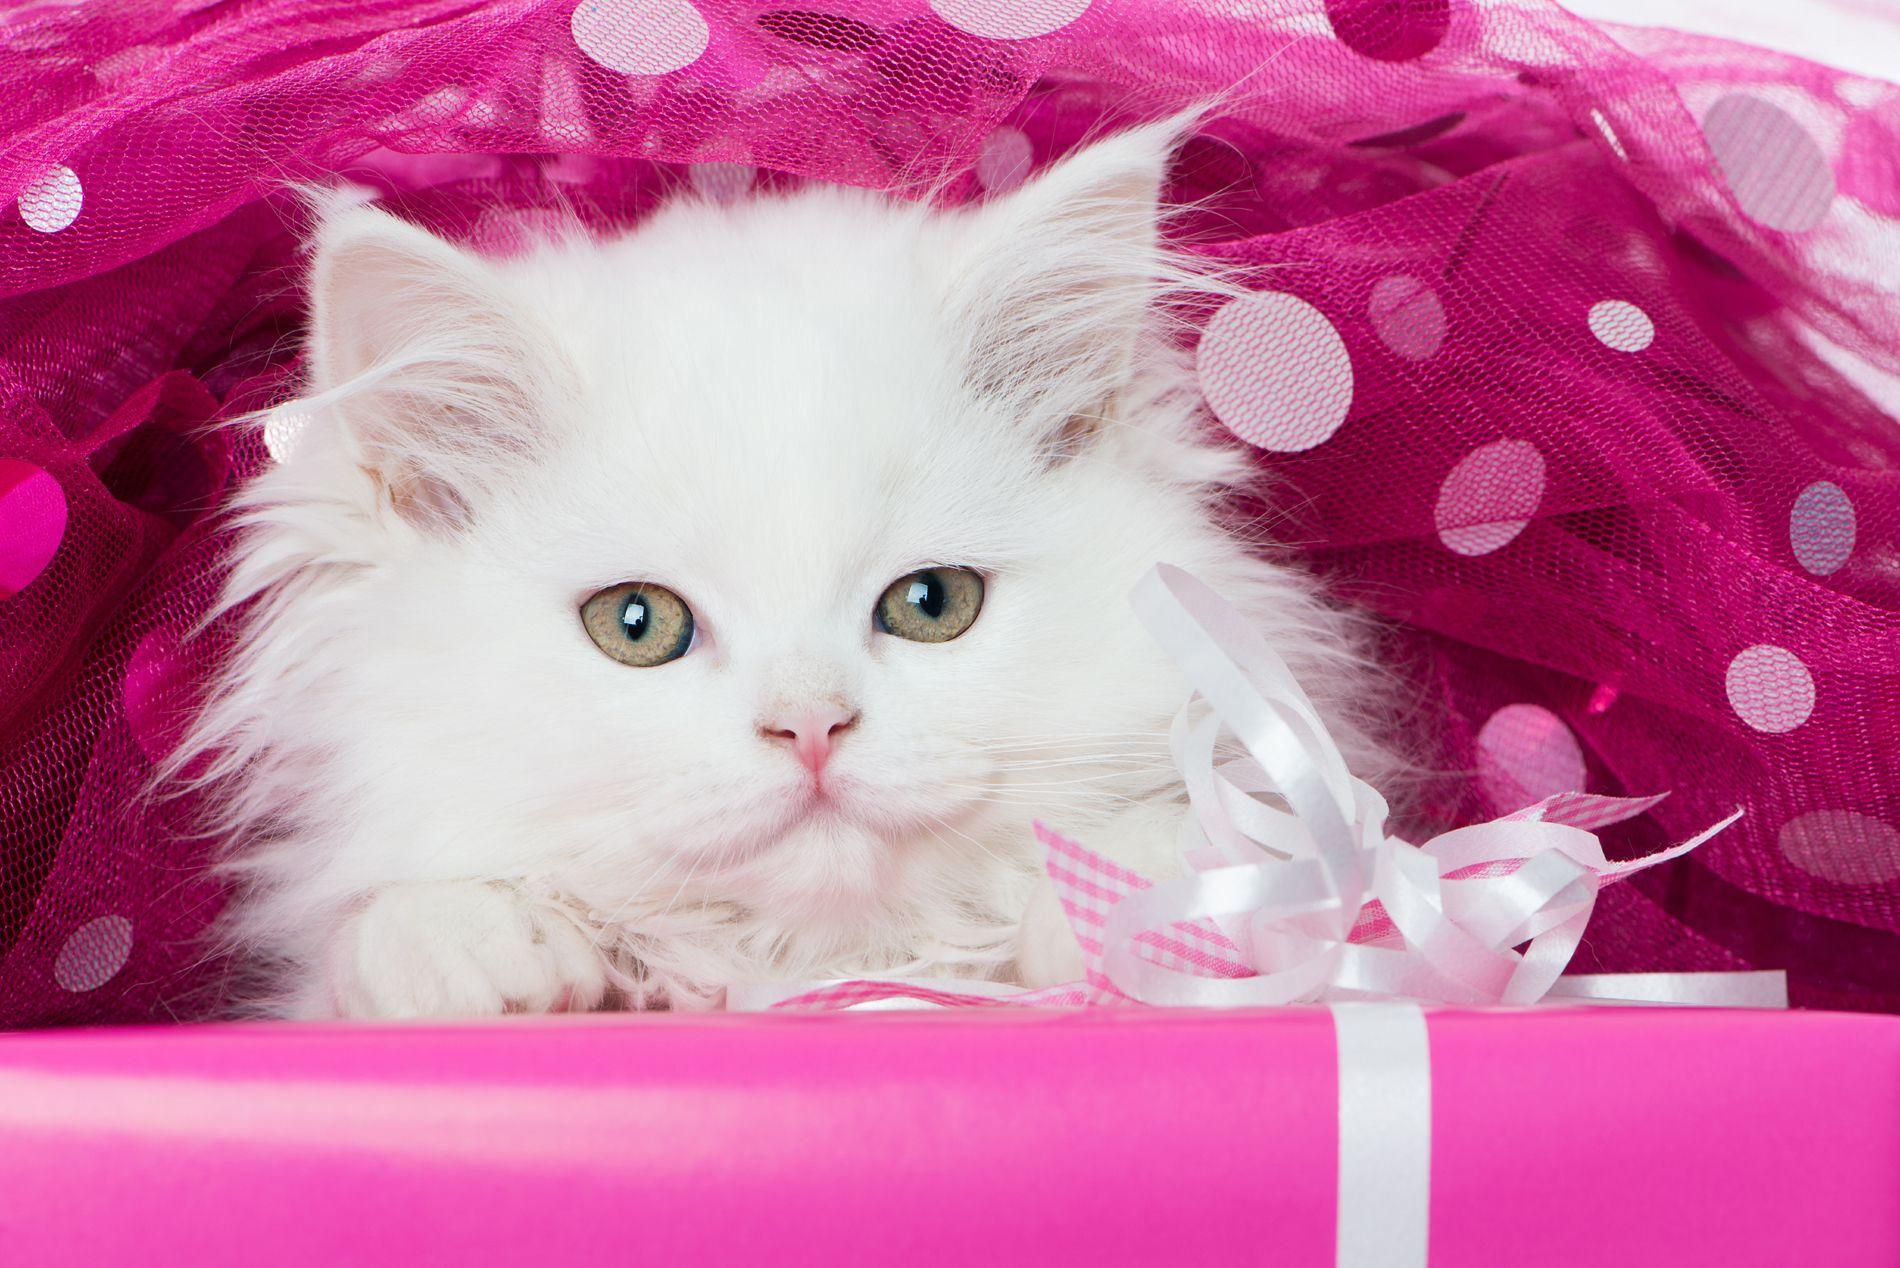 Cute Cat Wallpapers As Dp Wallpaper Cave The cat loves being neat and clean. cute cat wallpapers as dp wallpaper cave